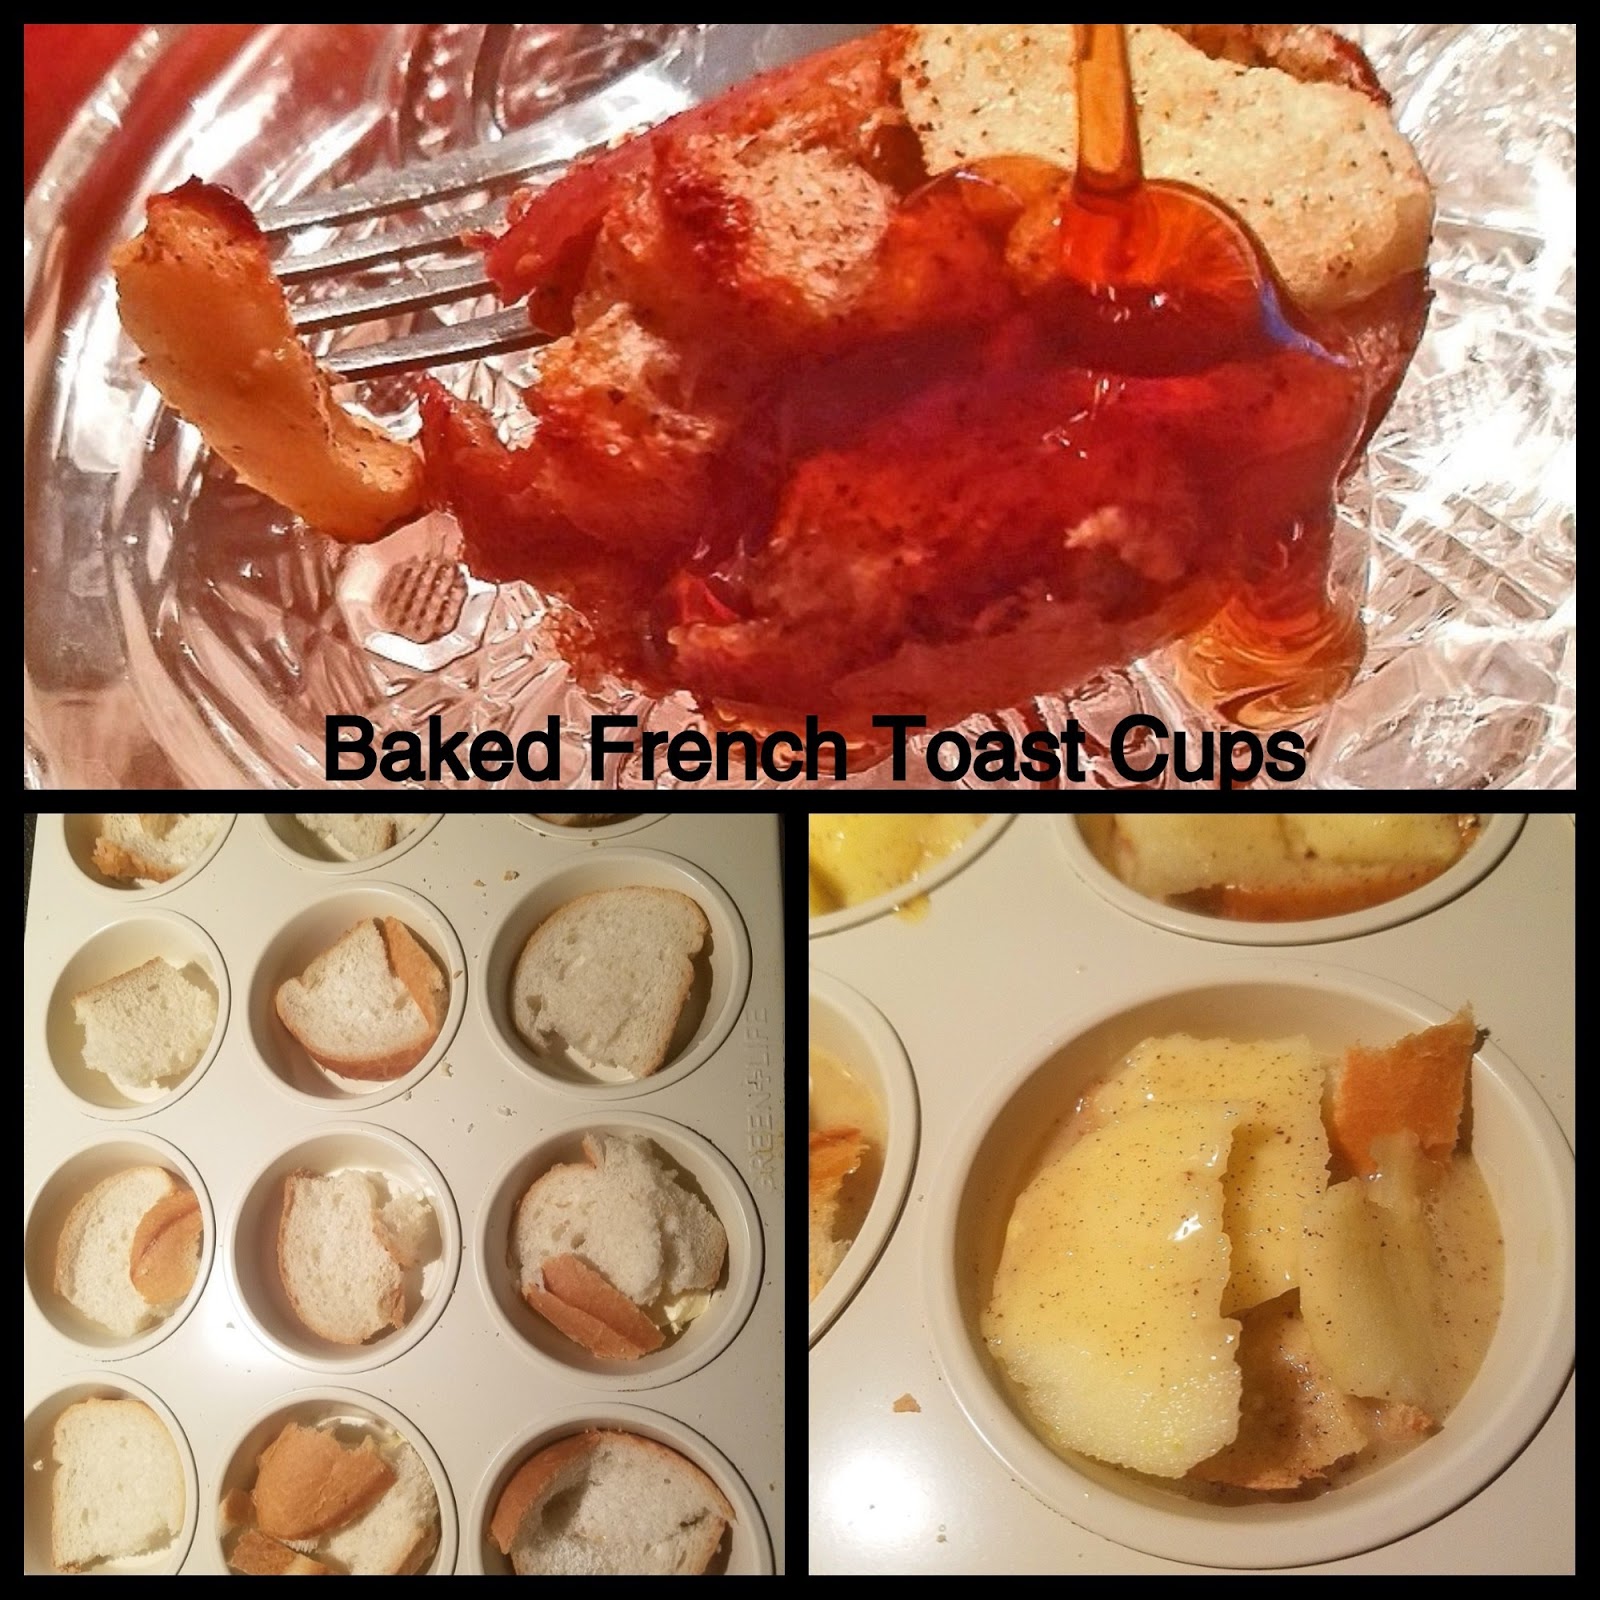 Baked french toast in a cupcake tin easy recipe with apples, cinnamon and bread. All in one cupcake tin. Nothing easier than baking french toast